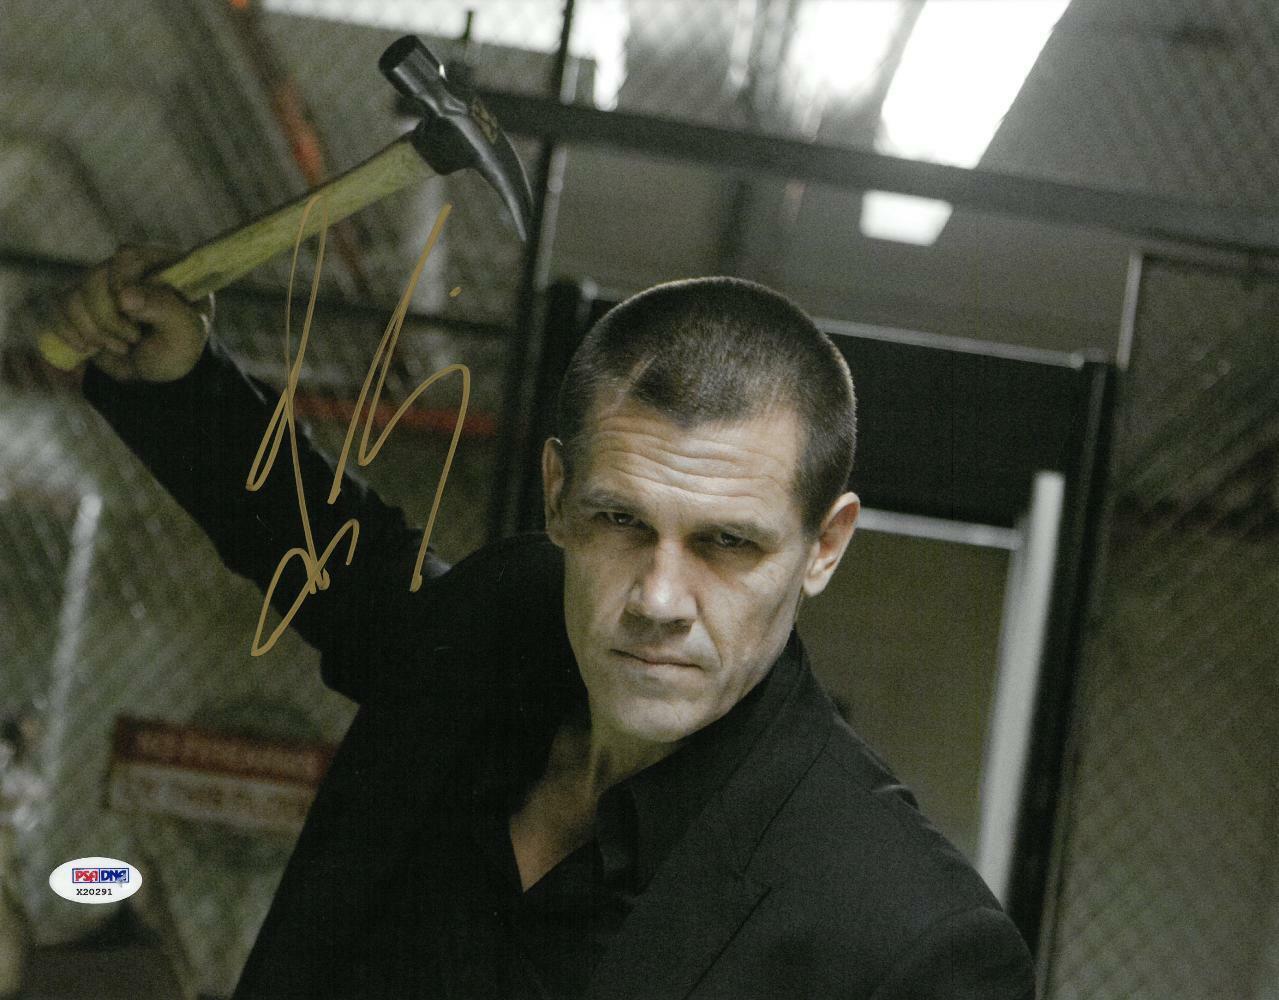 Josh Brolin Signed Oldboy Authentic Autographed 11x14 Photo Poster painting PSA/DNA #X20291